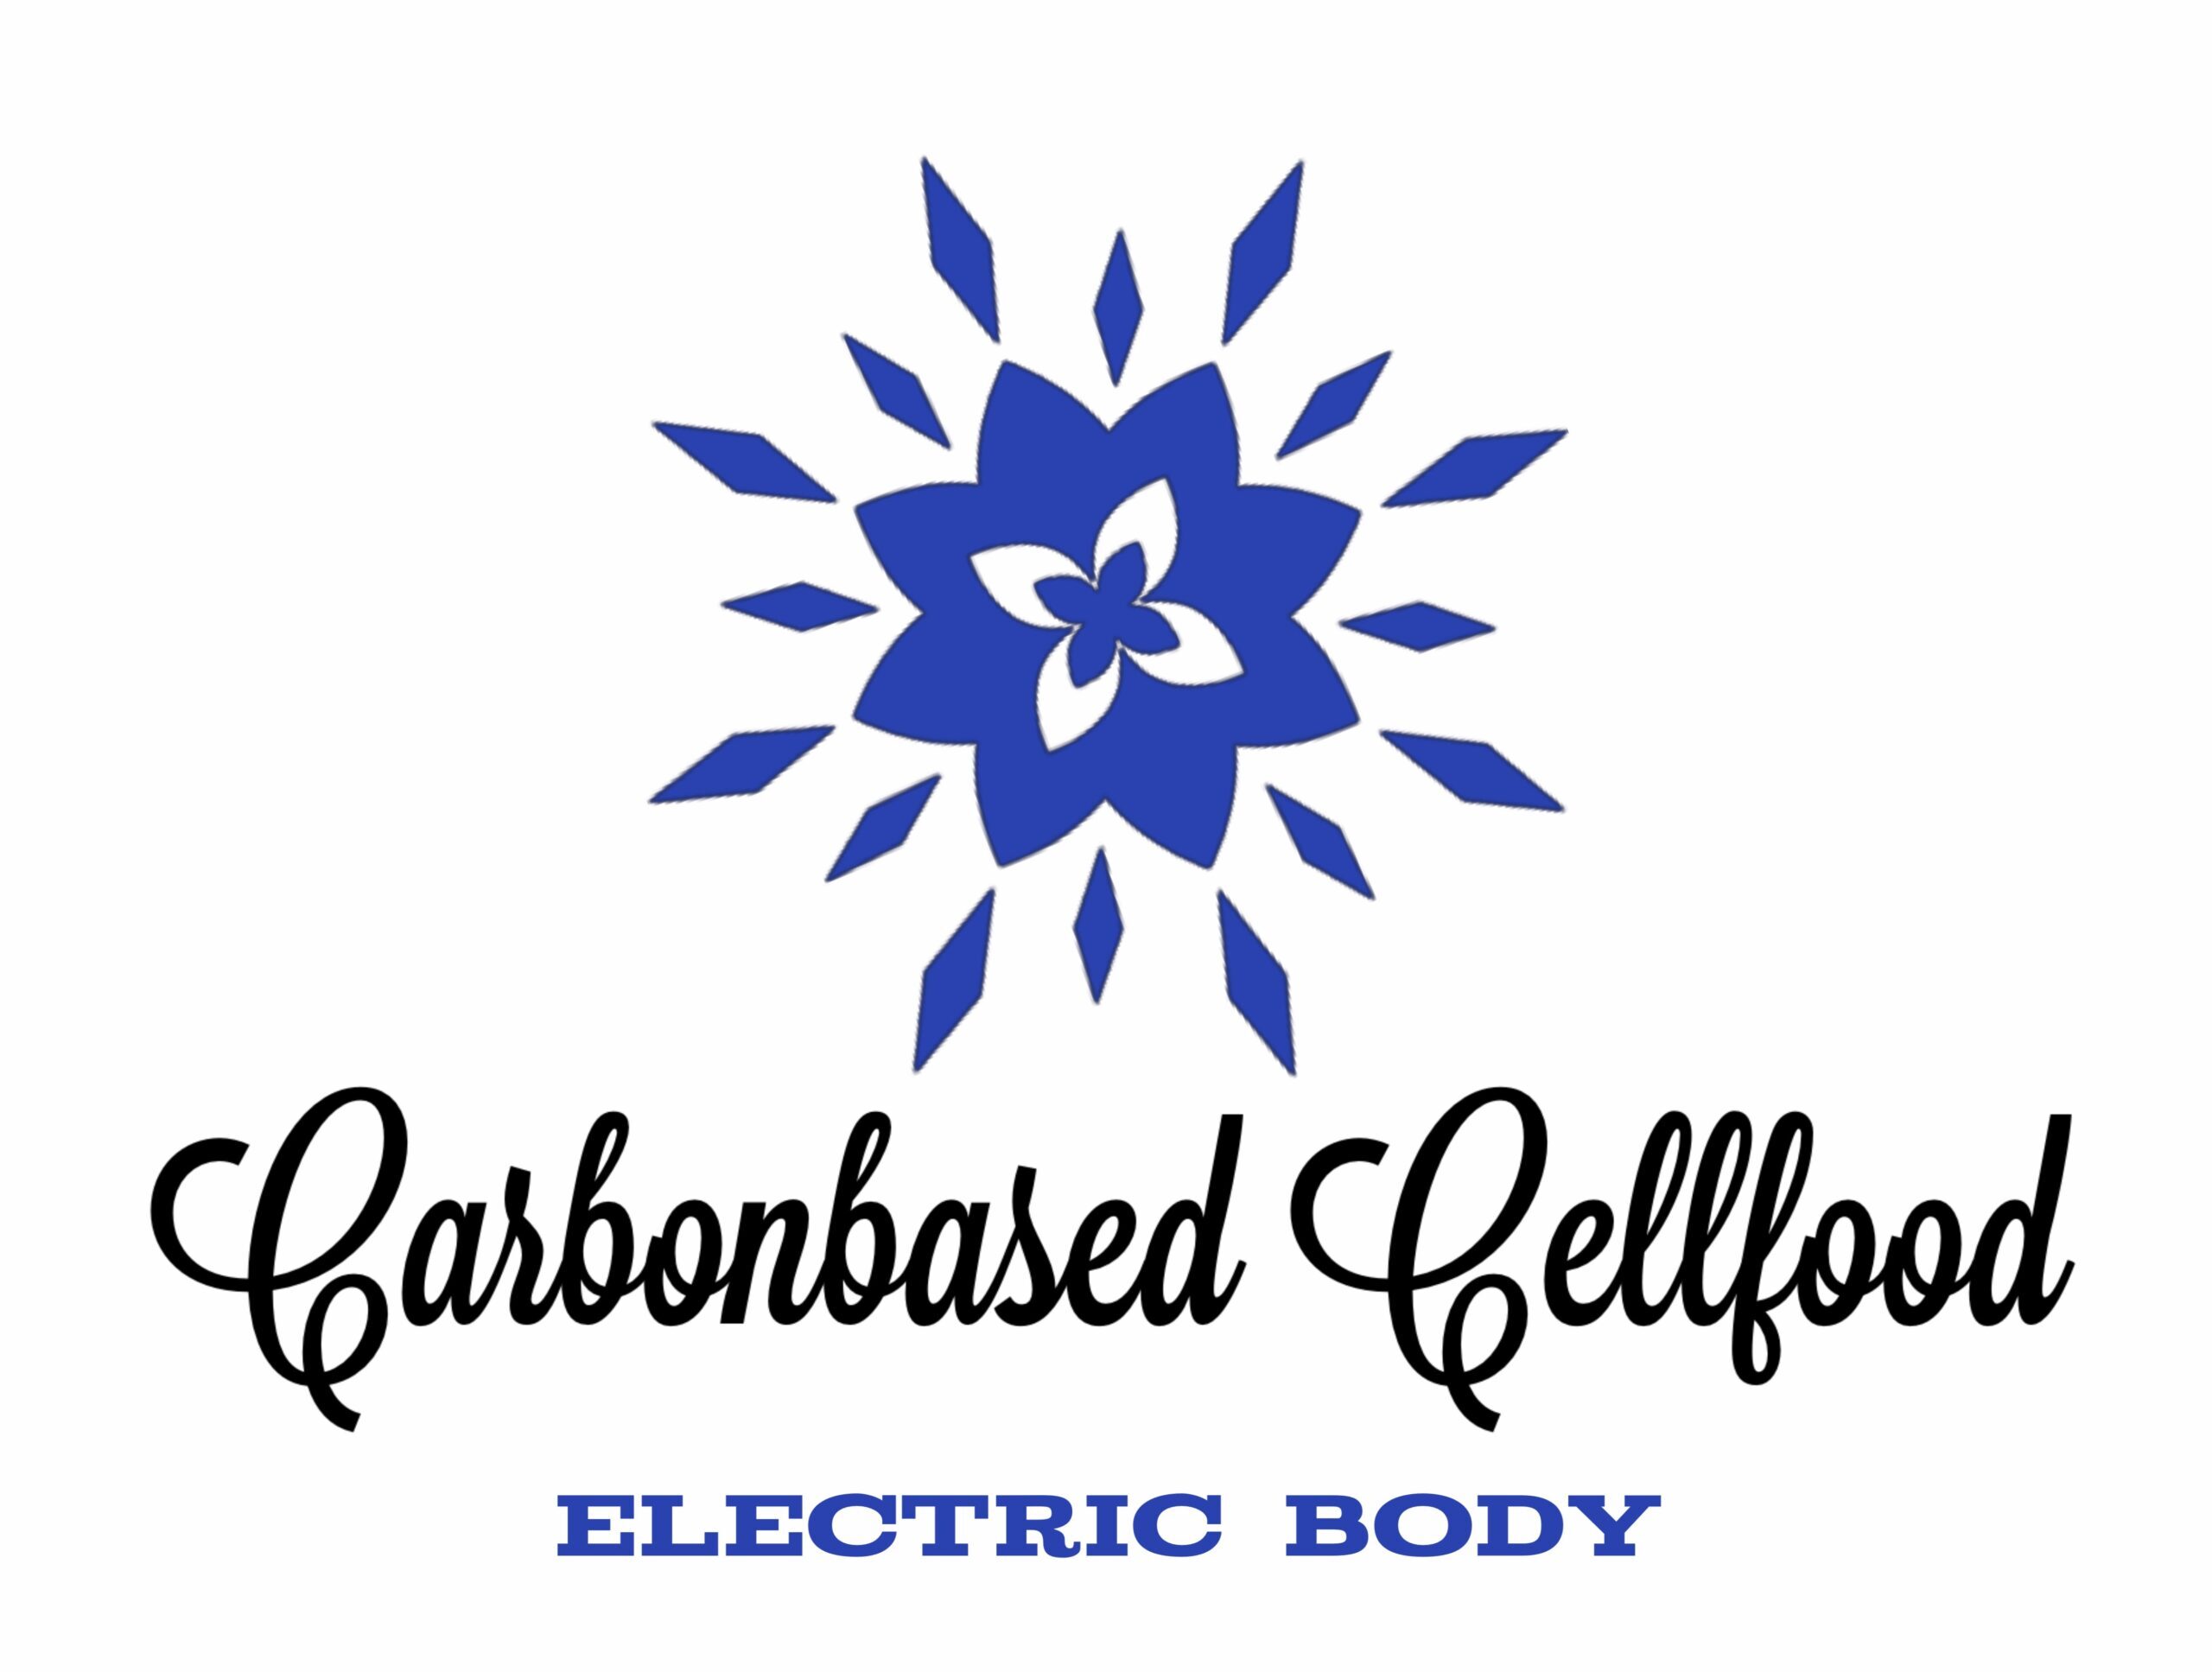 Carbonbased Cellfood Electric Body